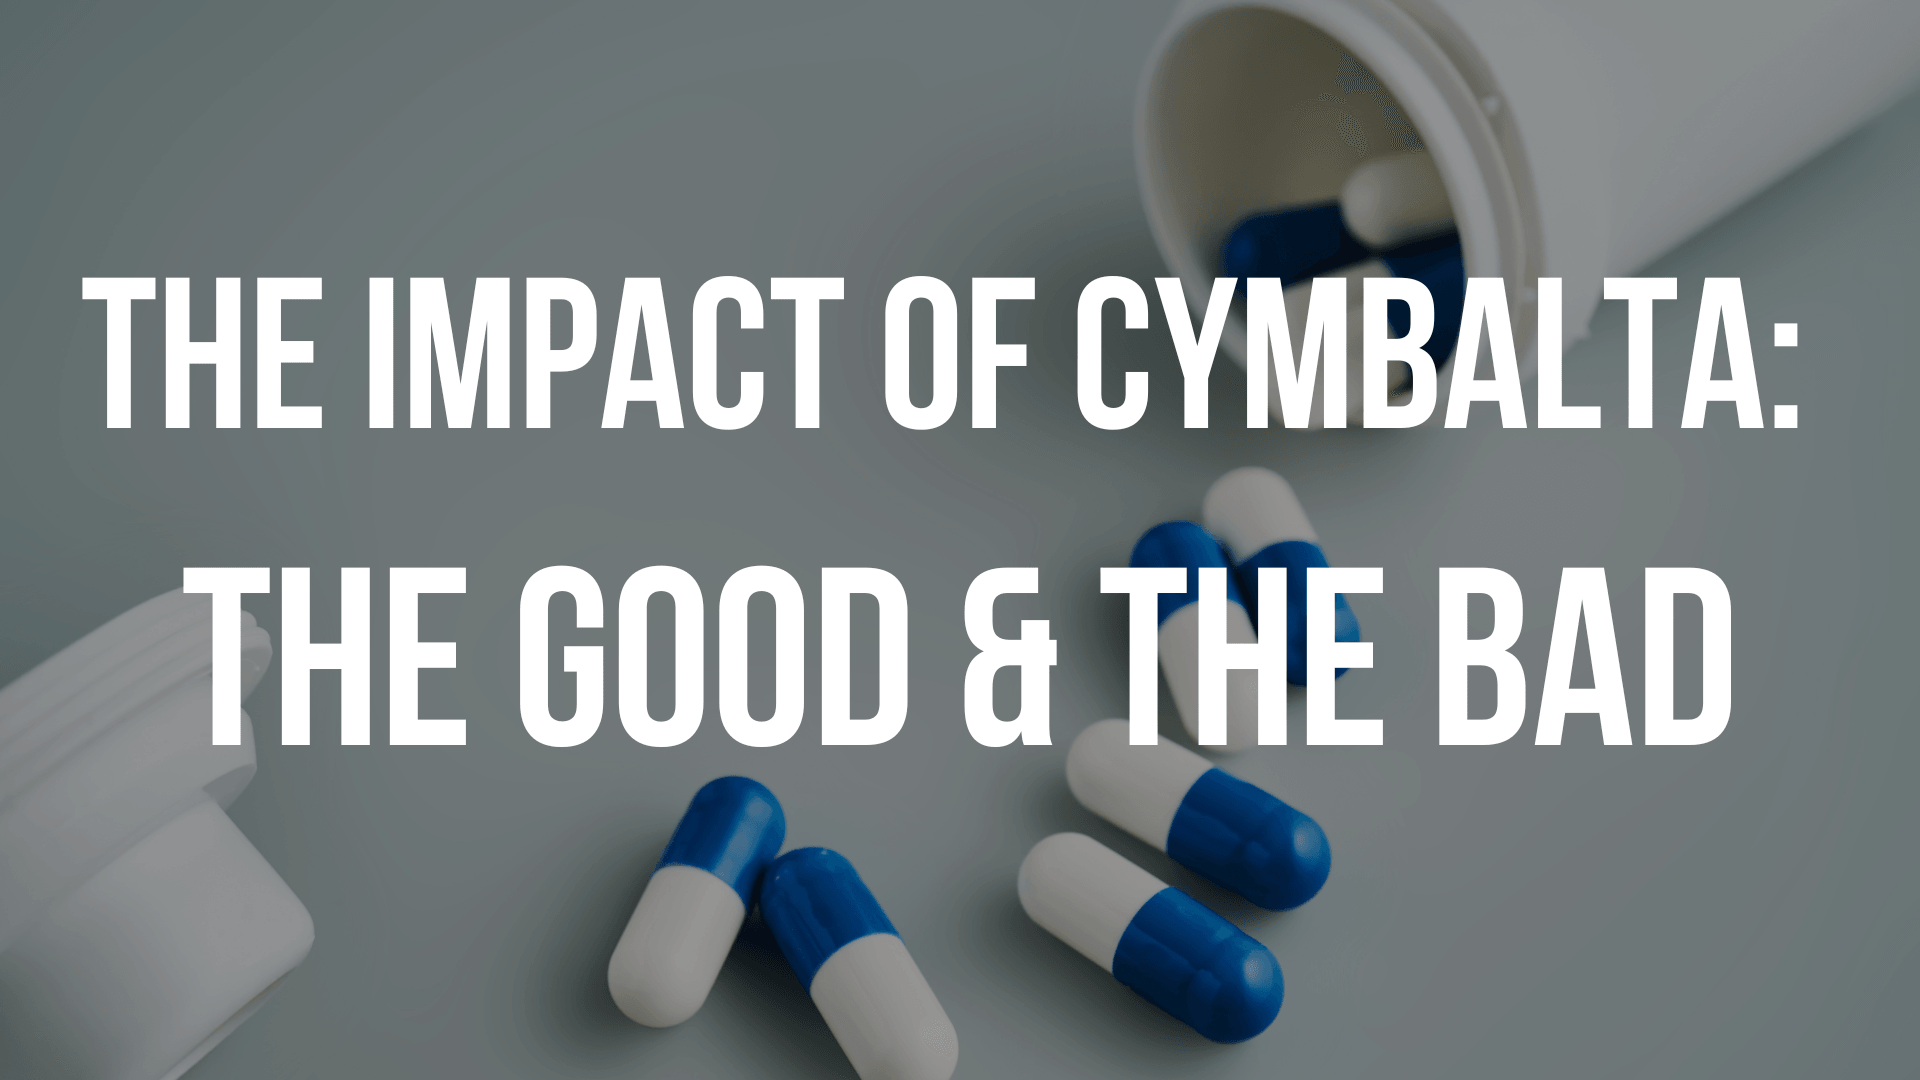 The Impact of Cymbalta: The Good & The Bad